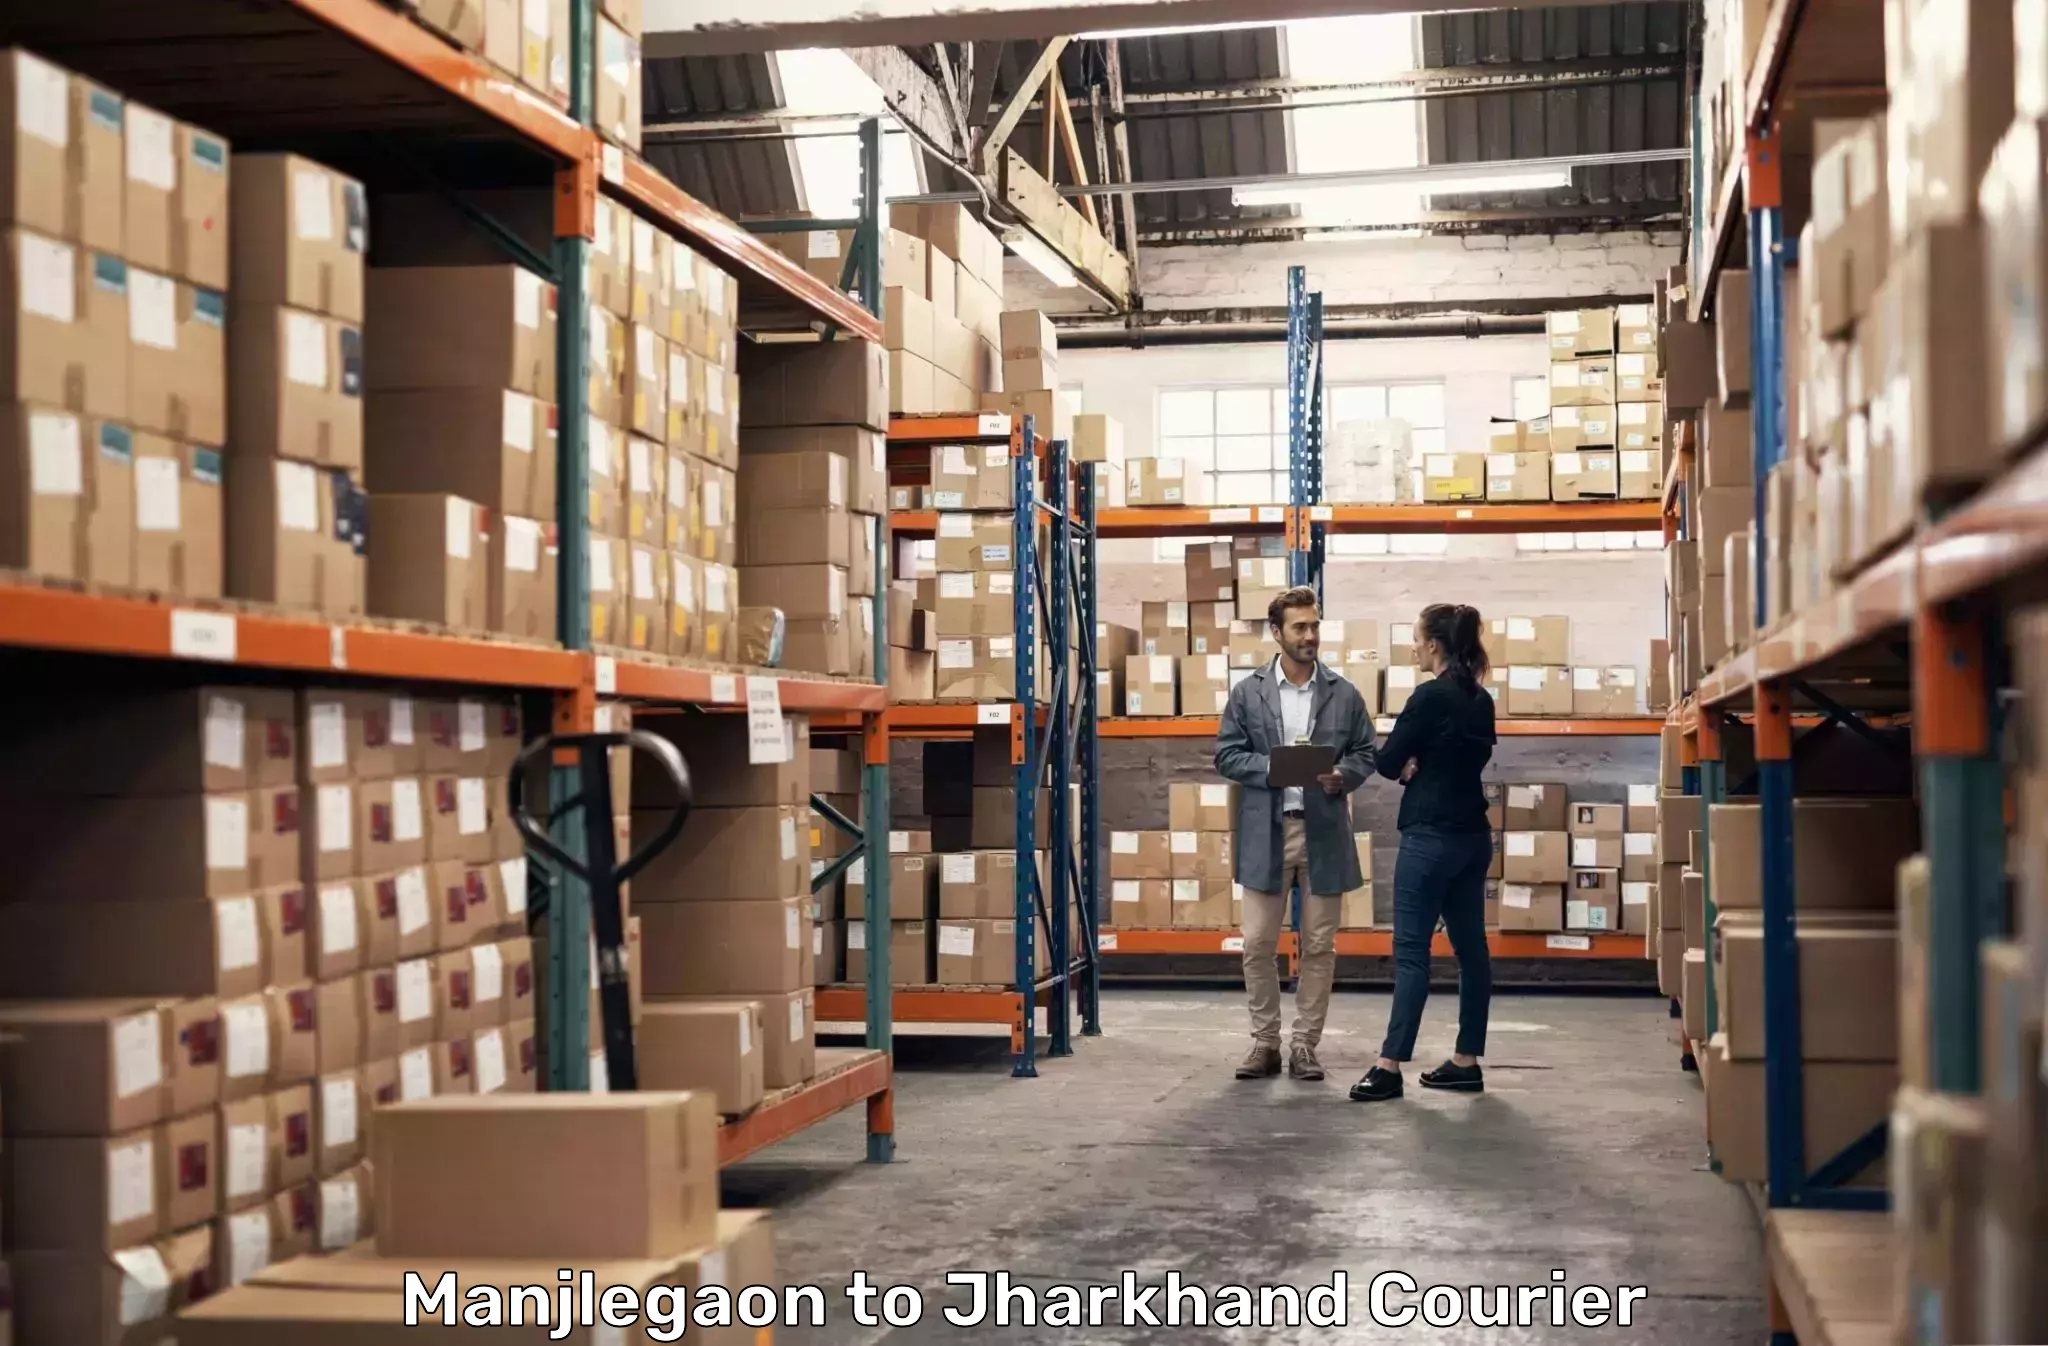 Reliable courier service Manjlegaon to Birla Institute of Technology Ranchi